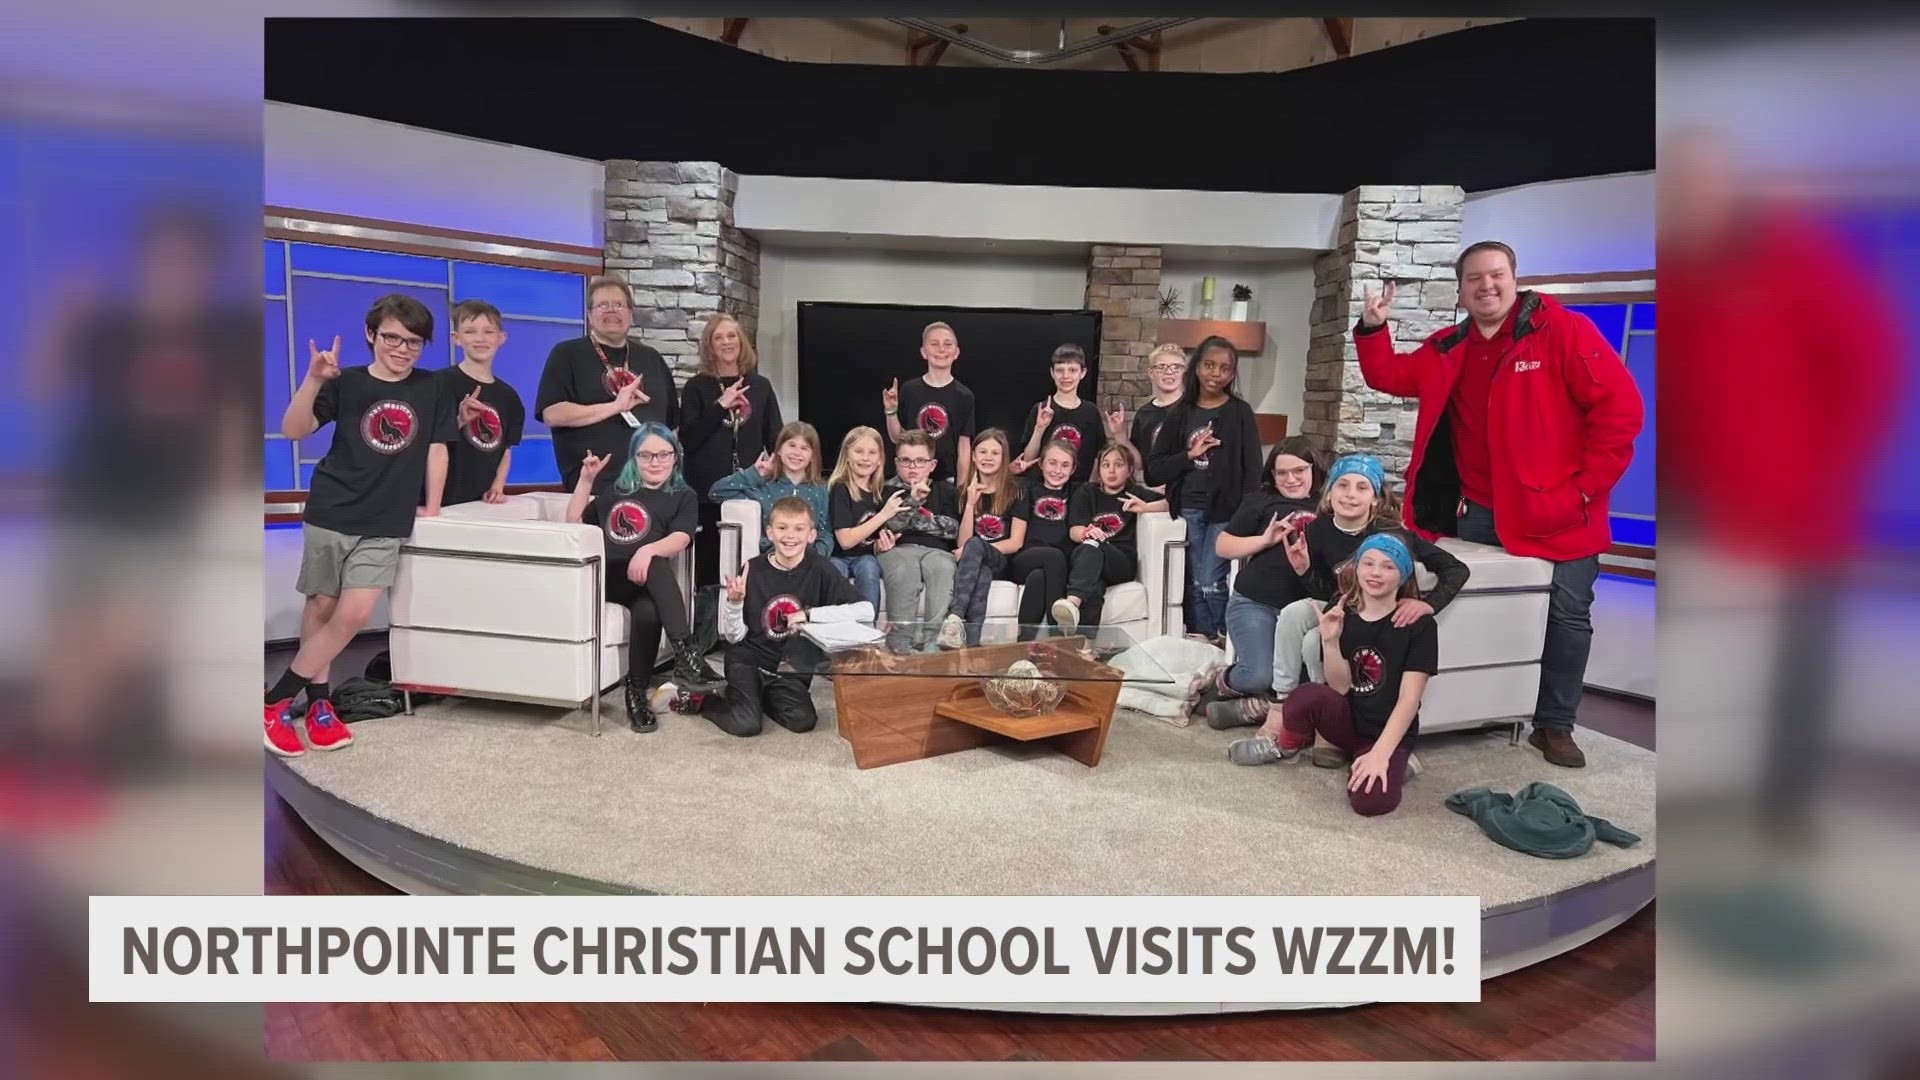 Students from NorthPointe Christian School visit 13 On Your Side! Tour hosted by Meteorologist Michael Behrens.